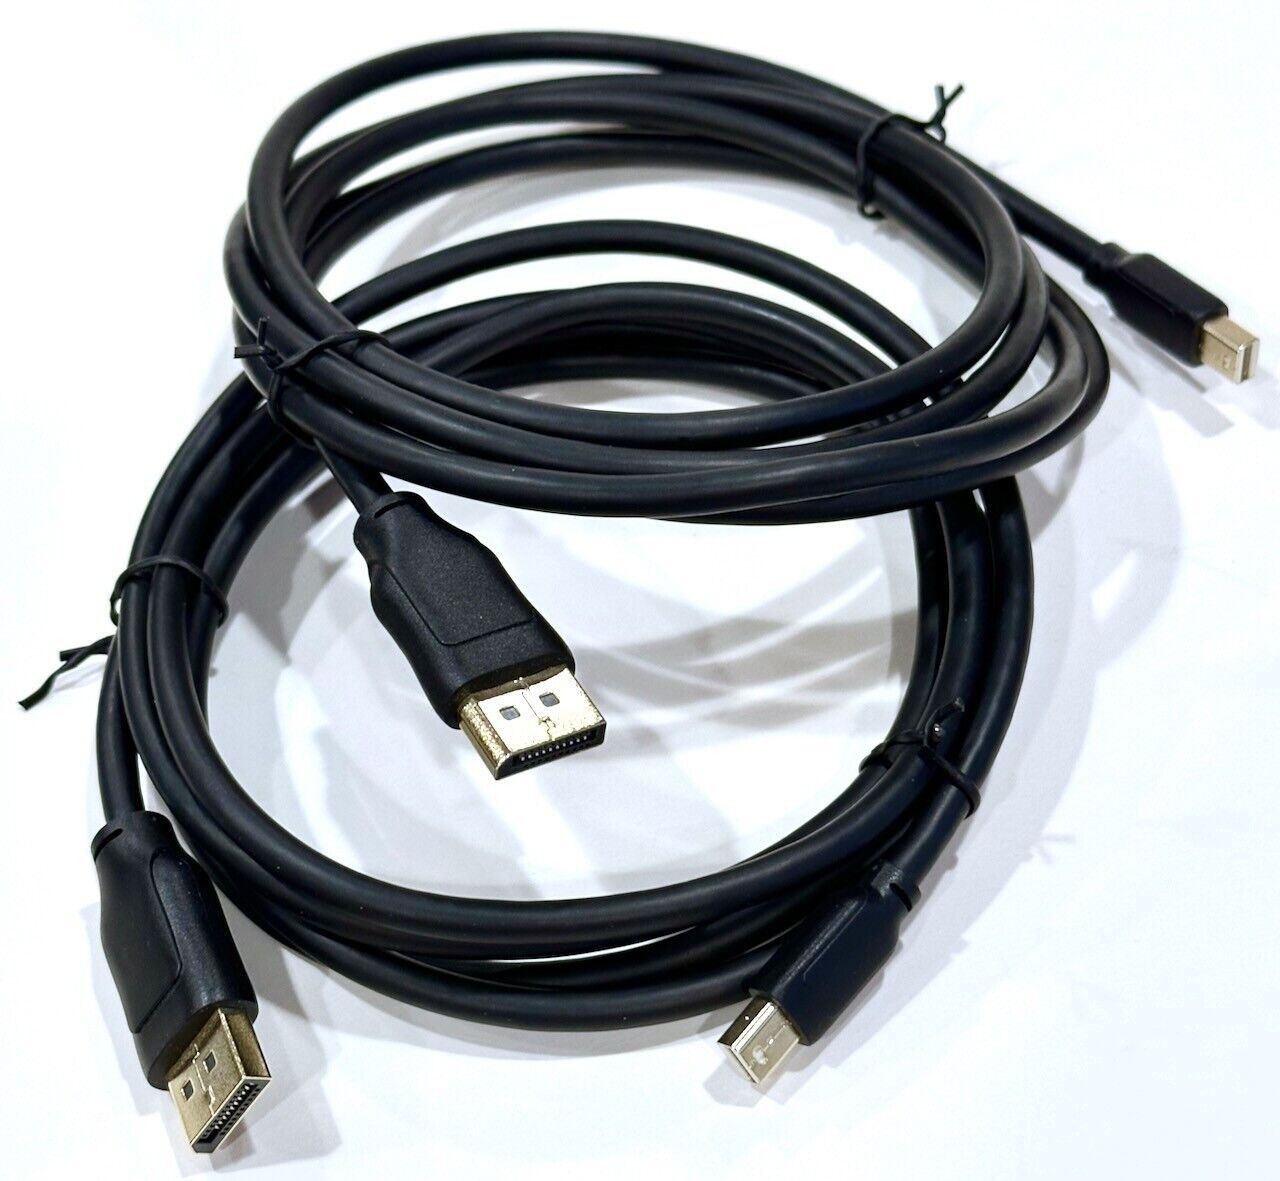 miniDisplayPort to DisplayPort Cable (6 foot) - Two cables - great condition